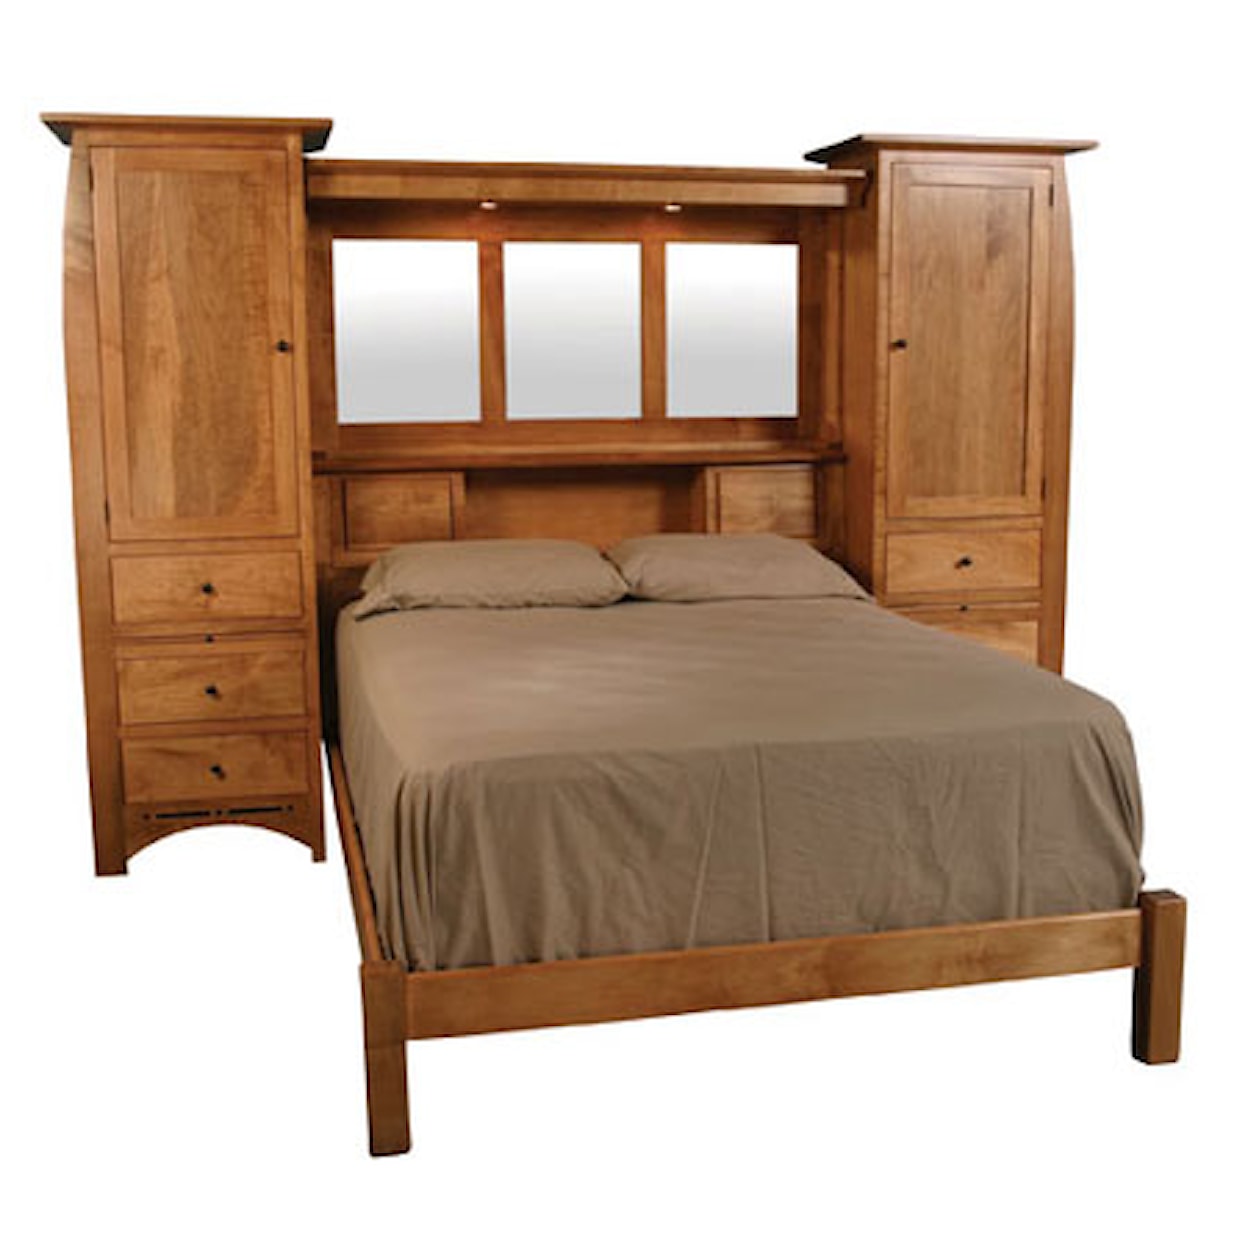 Simply Amish Aspen King Bed Wall Unit